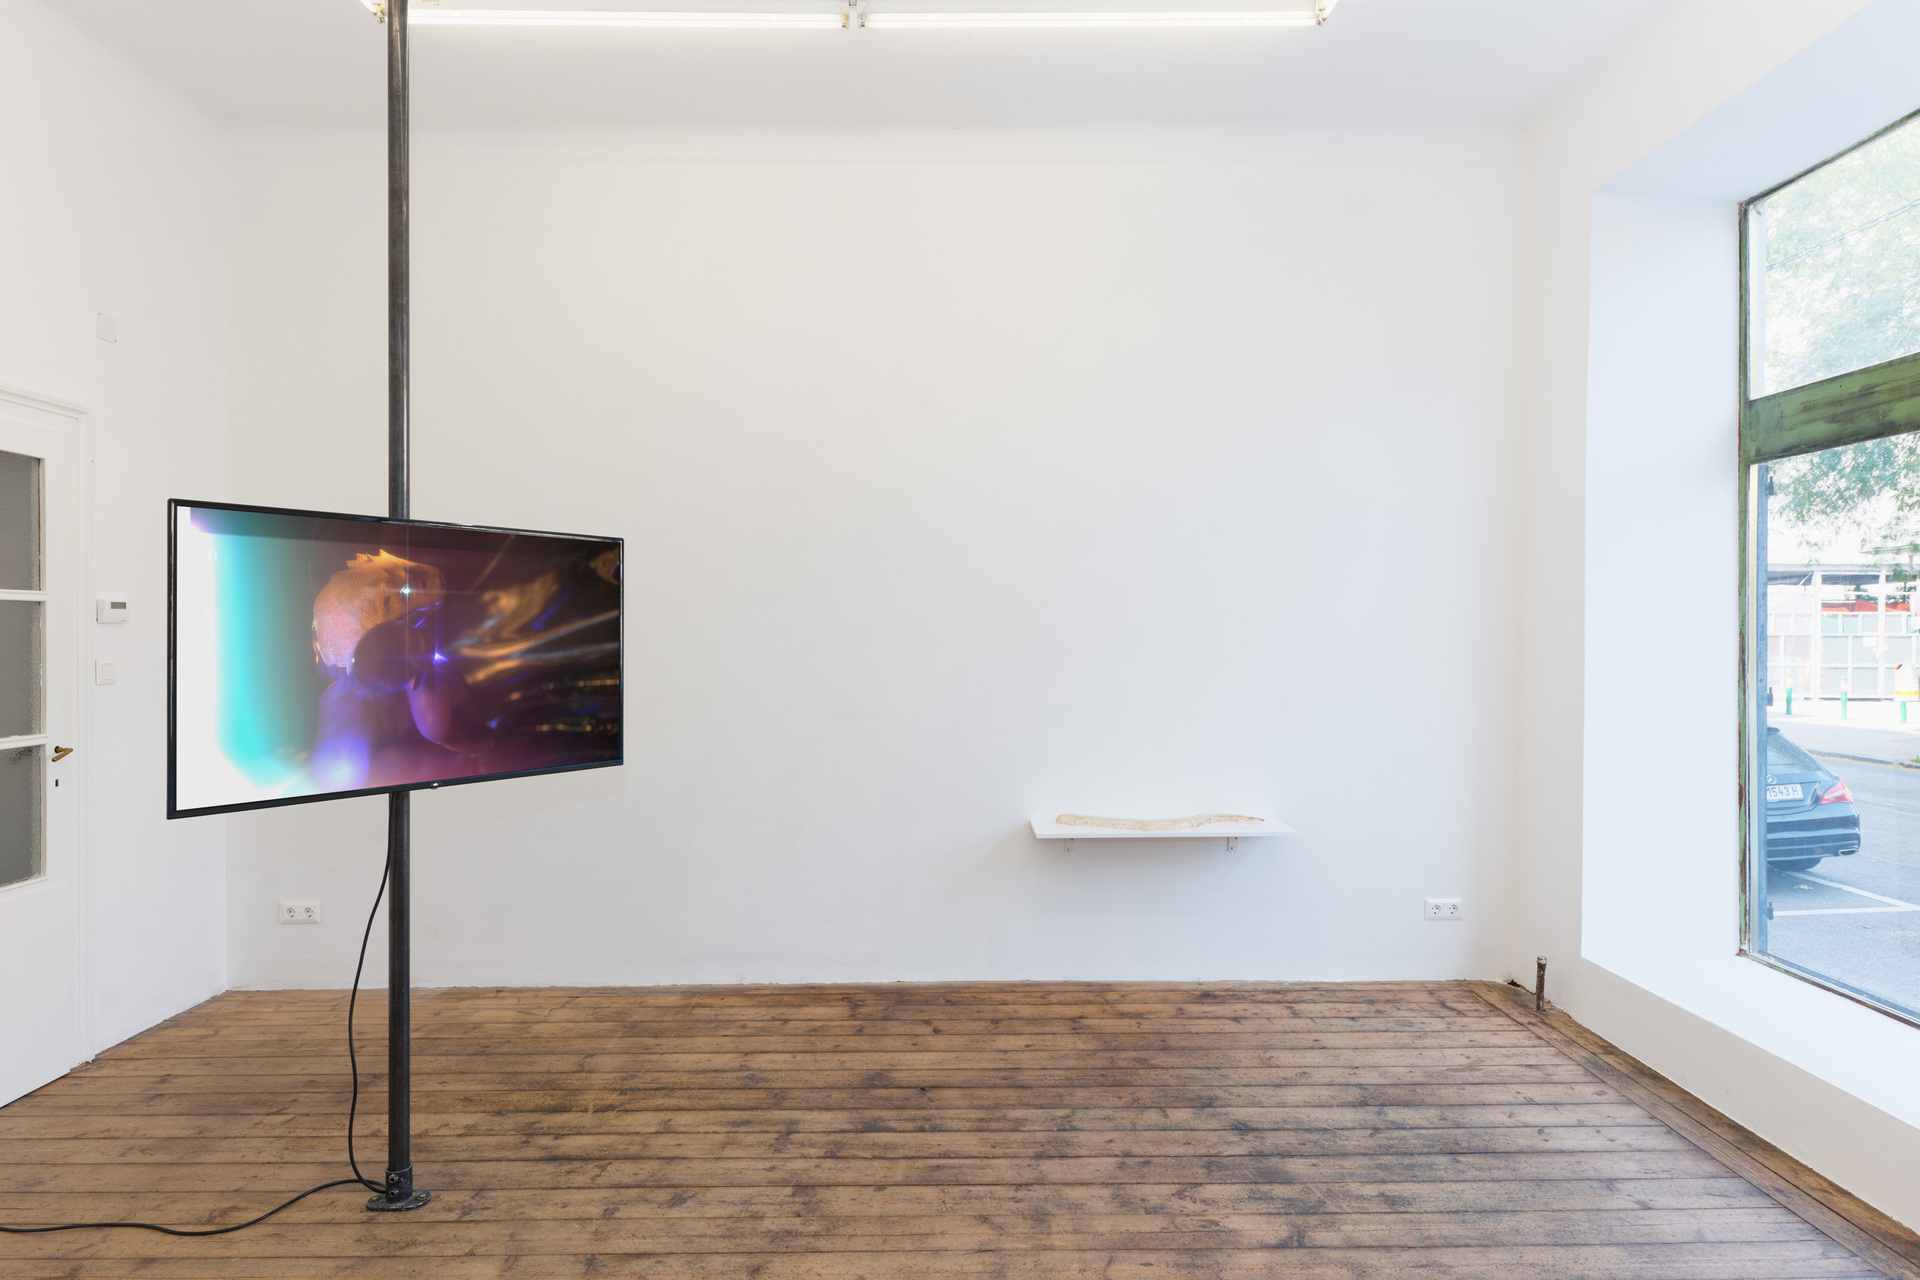 Tarek Lakhrissi, I wear my wounds on my tongue, installation view, Kevin Space 2021. Photo: Maximilian Anelli-Monti